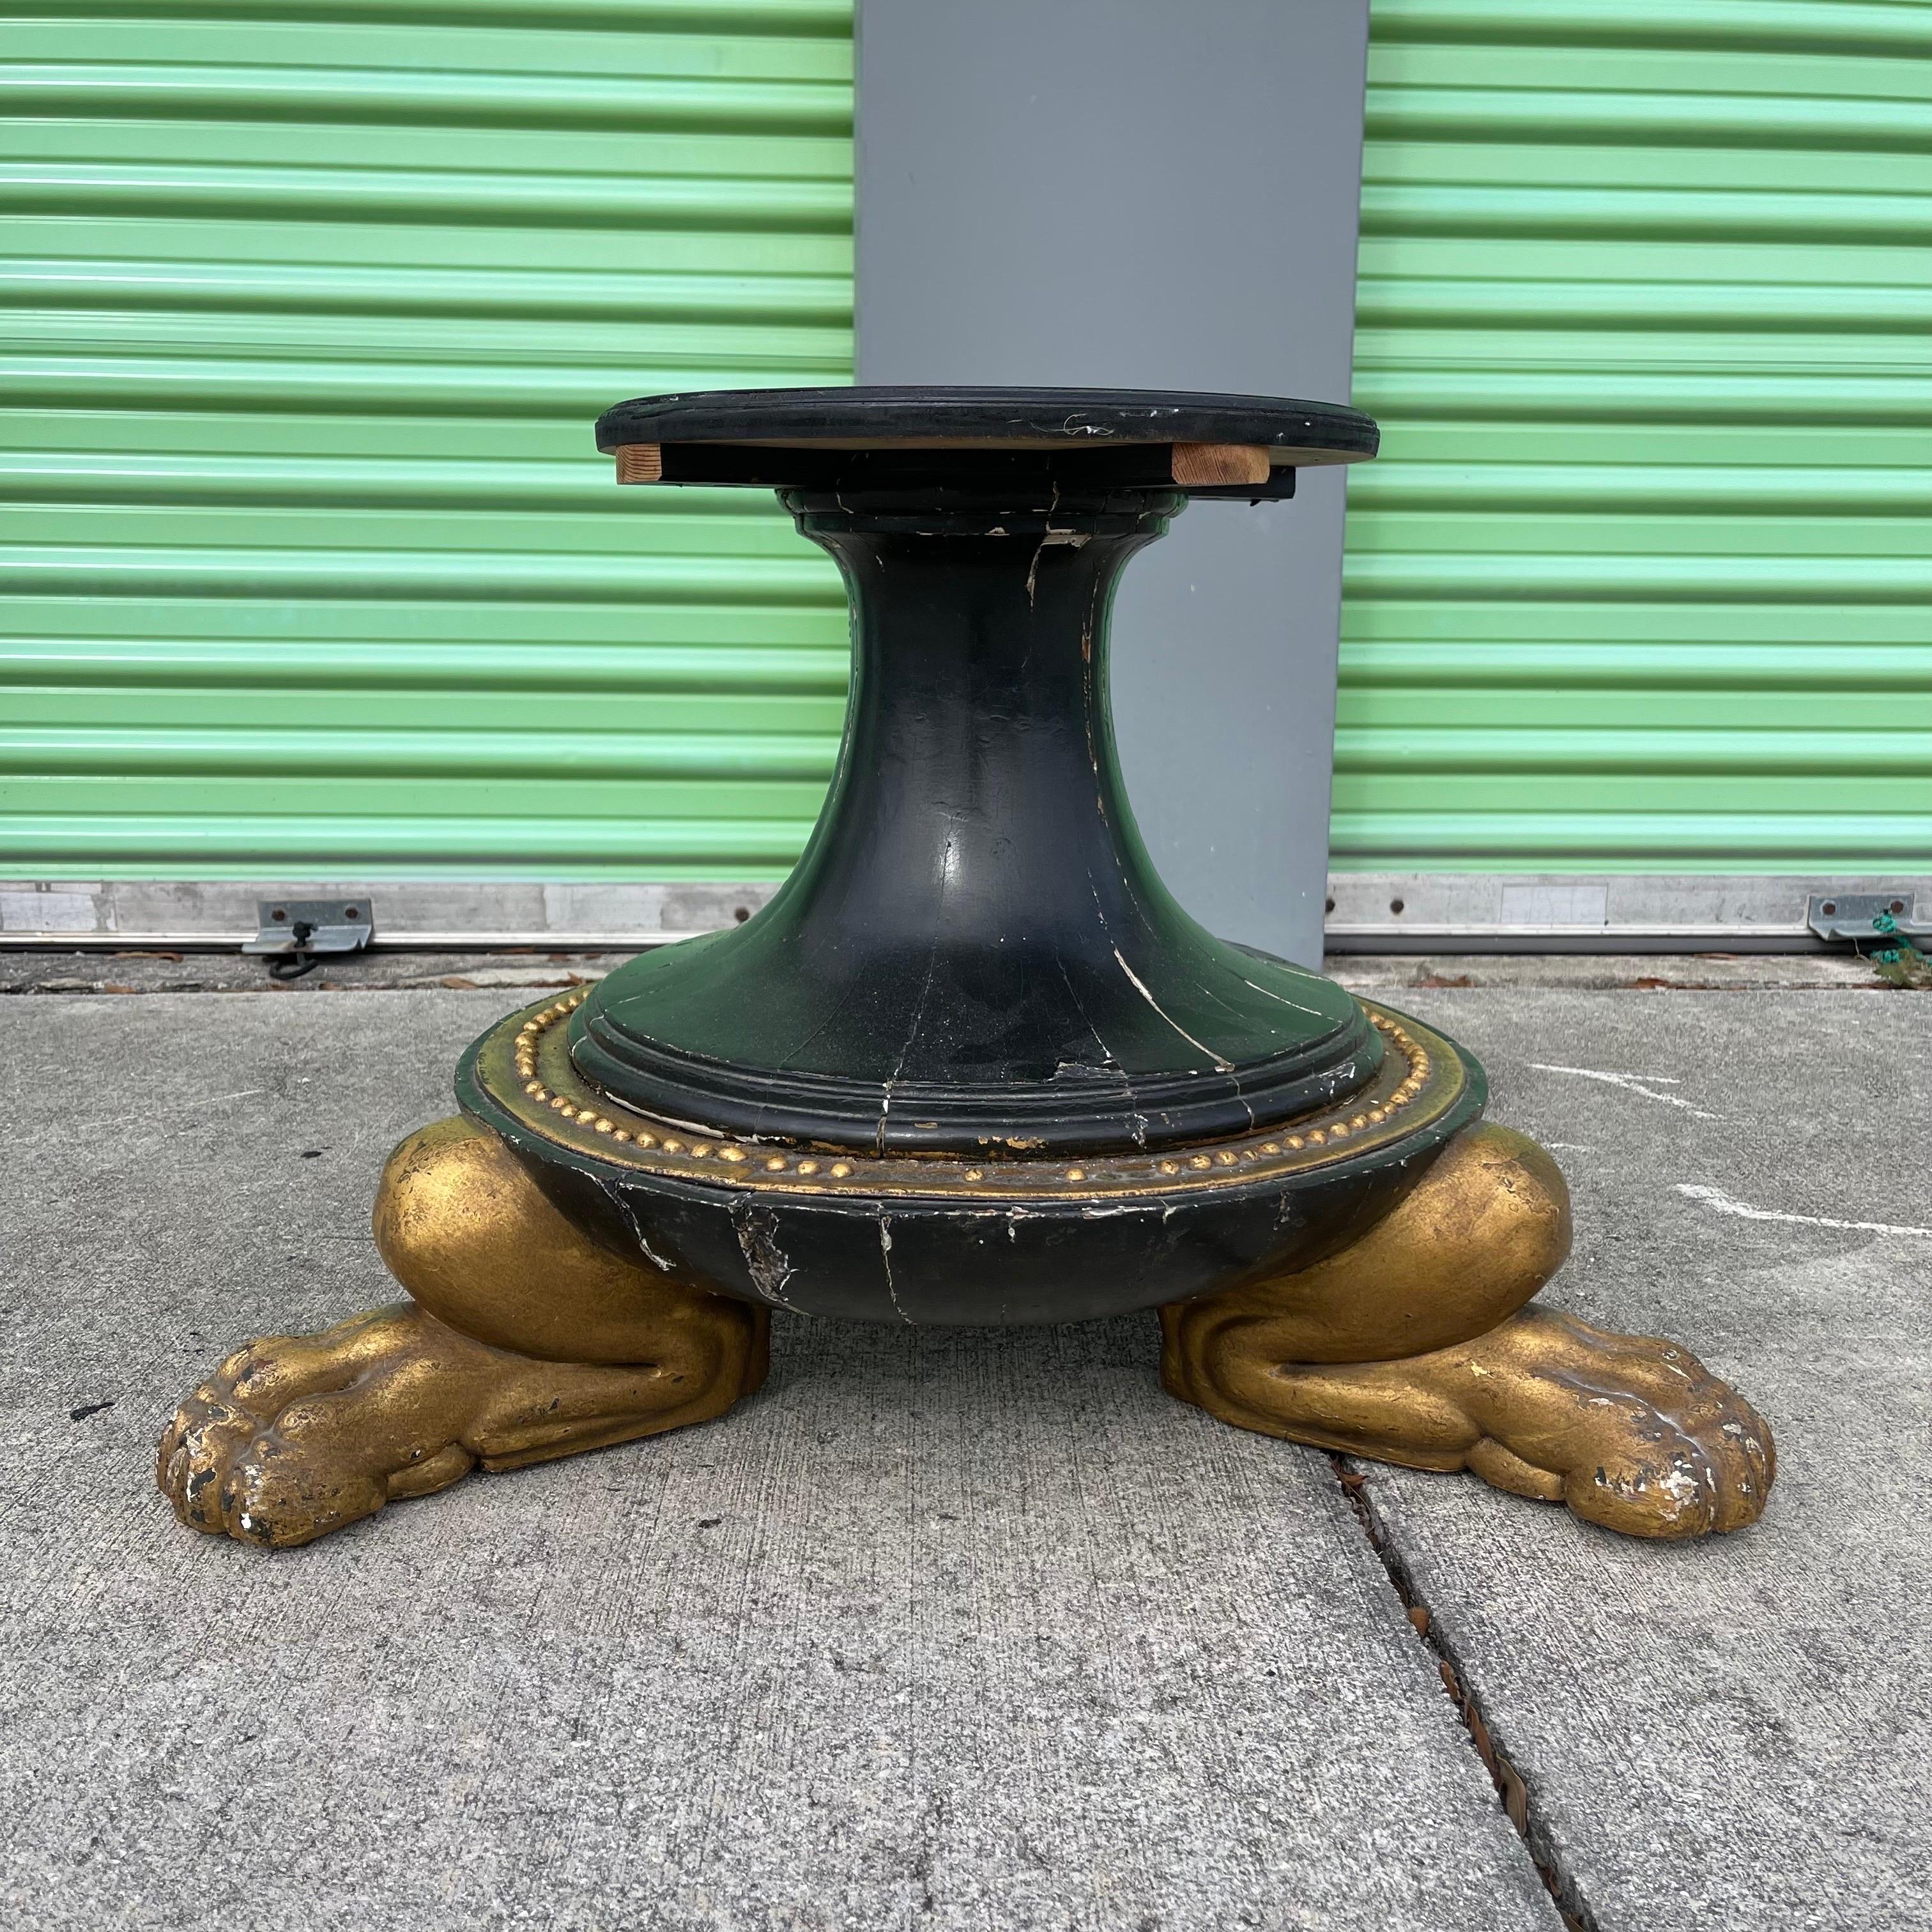 Repurposed giltwood lions paw foot base, turned into coffee table with faux antiqued mirror round top.

If preferred mirror glass top can be optional and the base shipped alone to Continental United States for $199. Please message for more